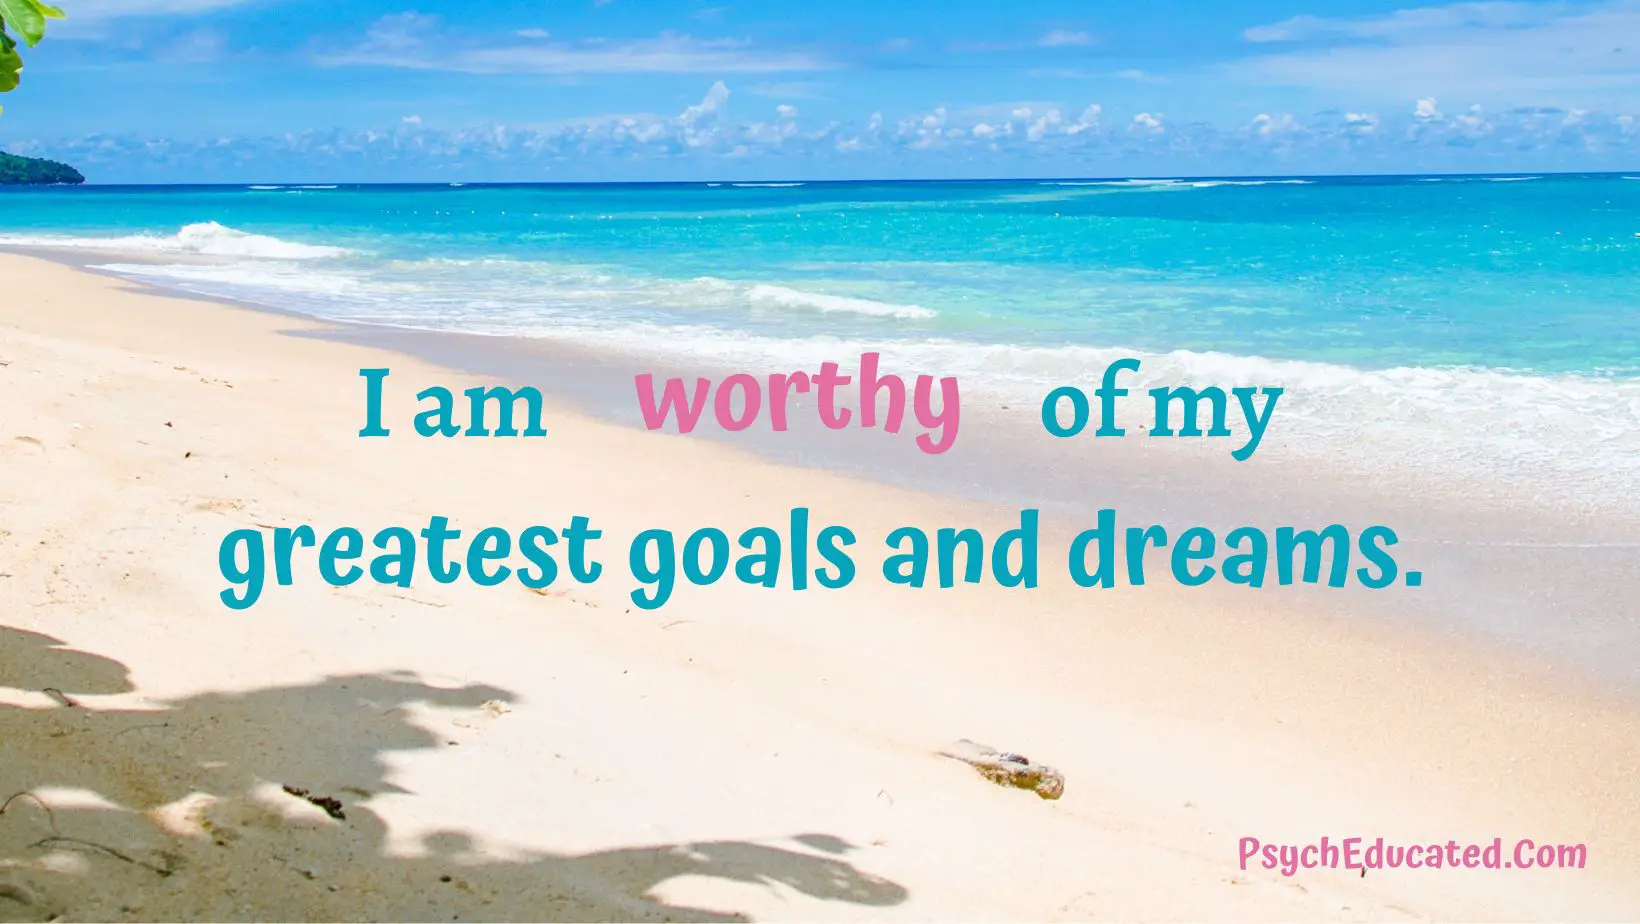 I am worthy of my greatest goals. positive affimation to achieve goals